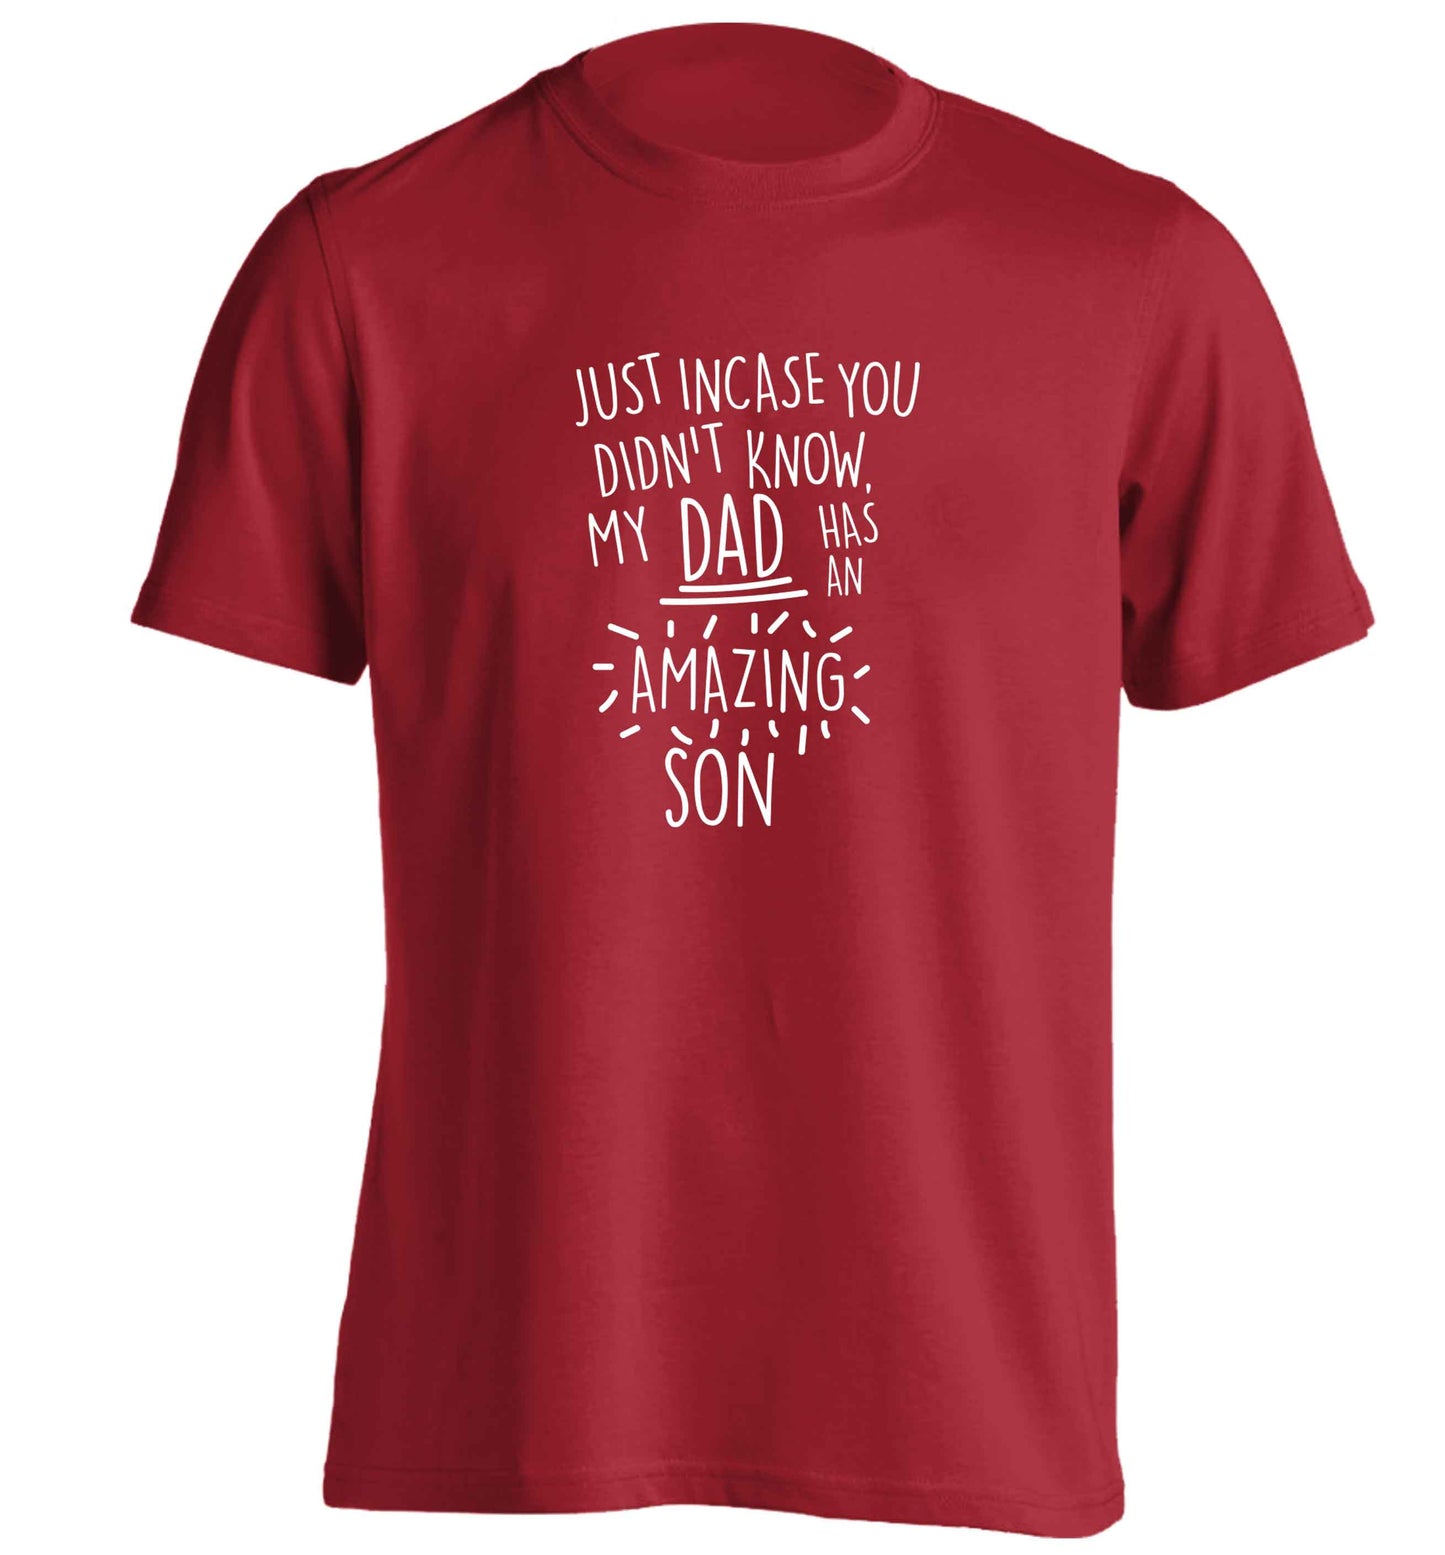 Just incase you didn't know my dad has an amazing son adults unisex red Tshirt 2XL